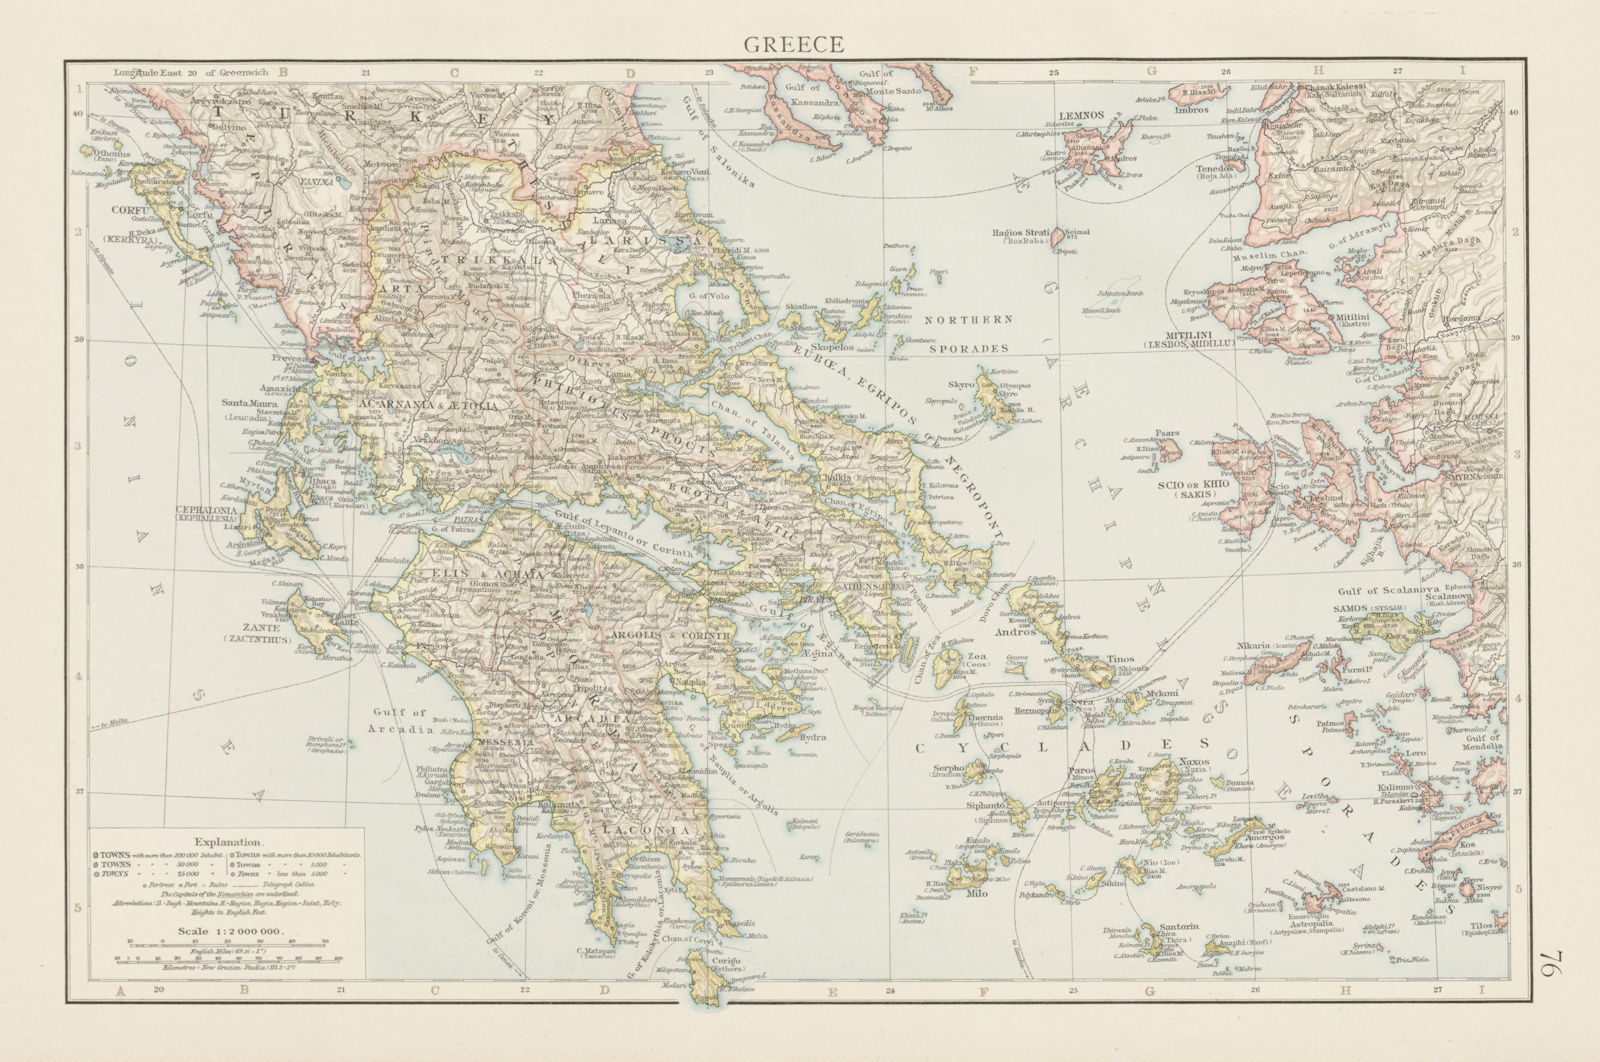 Associate Product Greece. Aegean & Ionian islands. Cyclades Sporades. THE TIMES 1900 old map